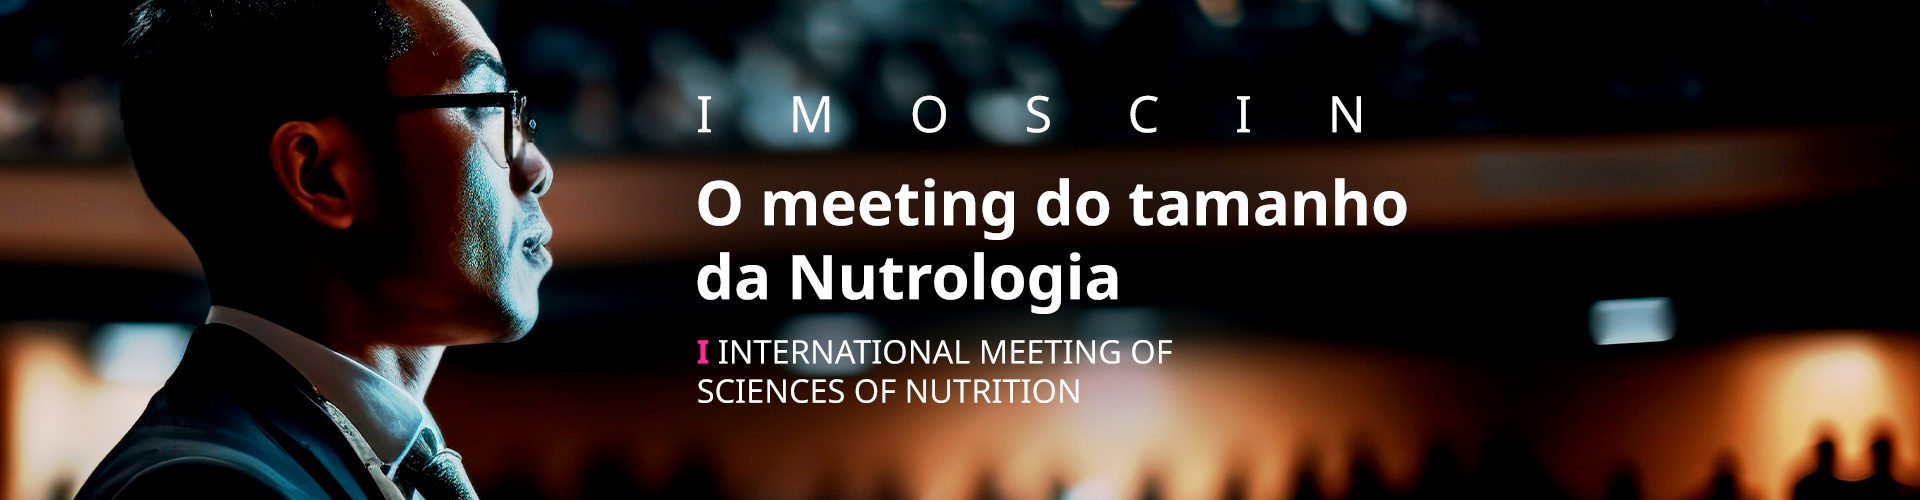 I INTERNATIONAL MEETING OF SCIENCES OF NUTRITION - IMOSCIN